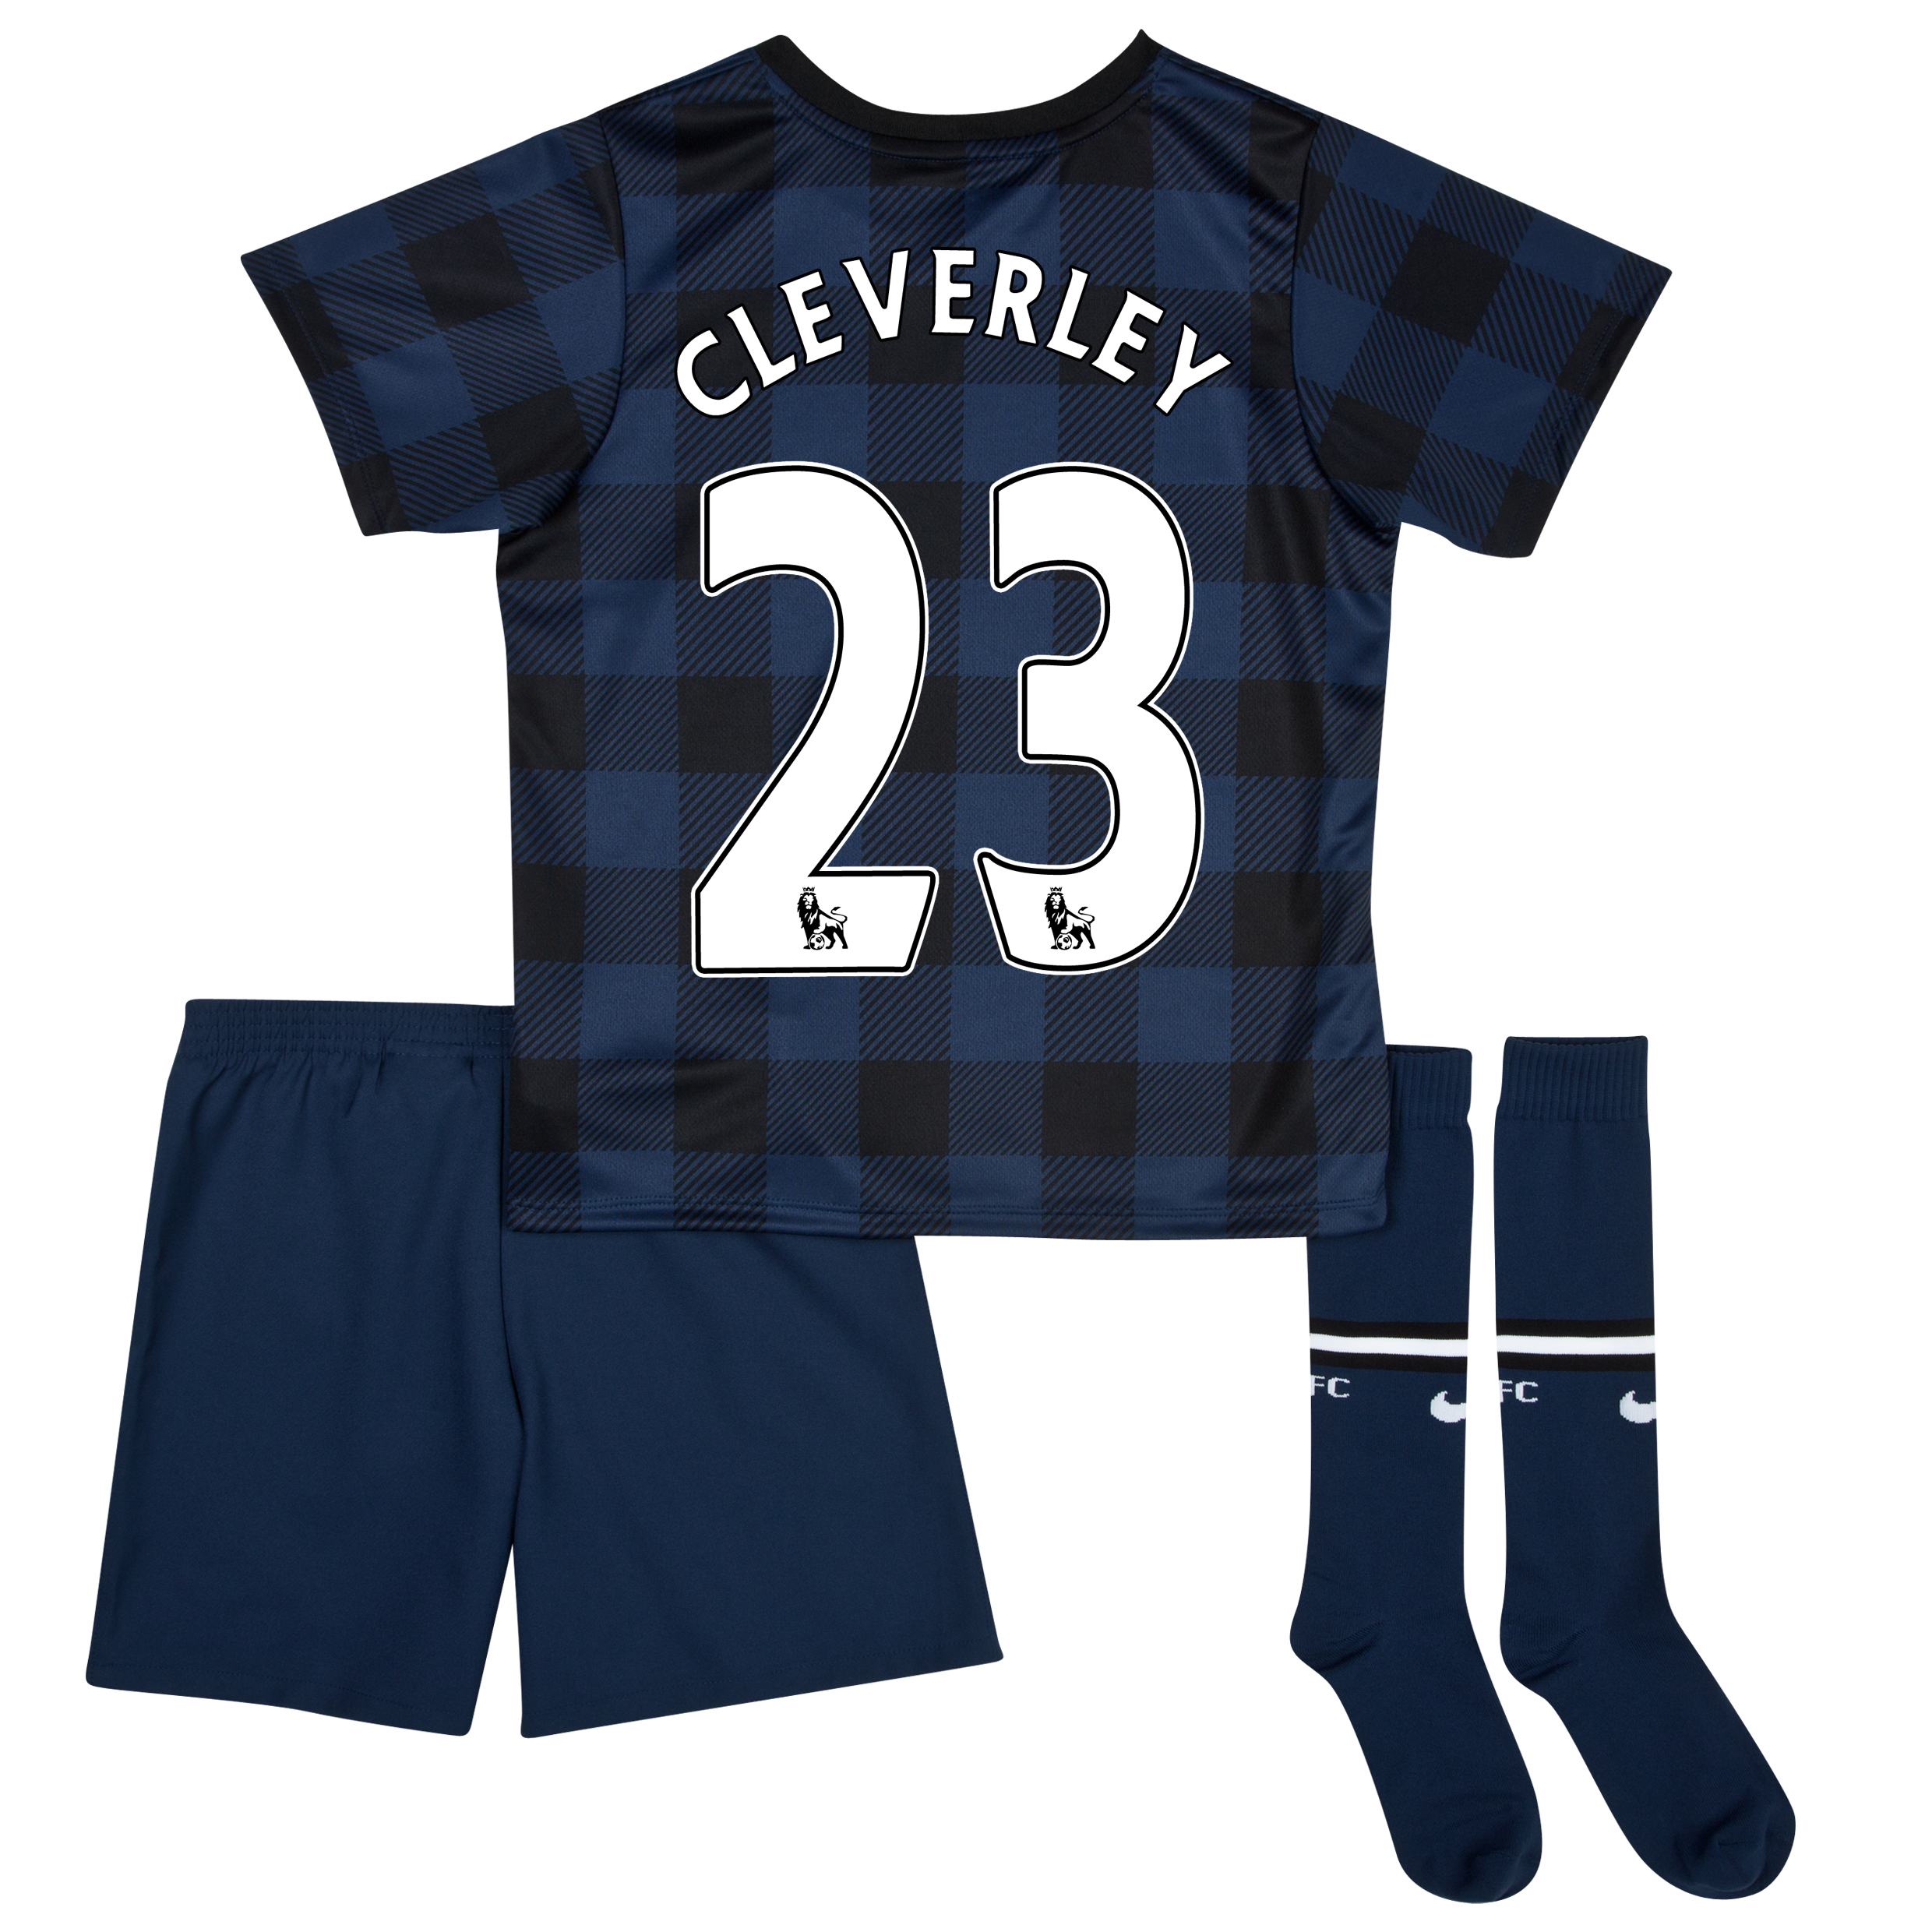 Manchester United Away Kit 2013/14 - Little Boys with Cleverley 23 printing